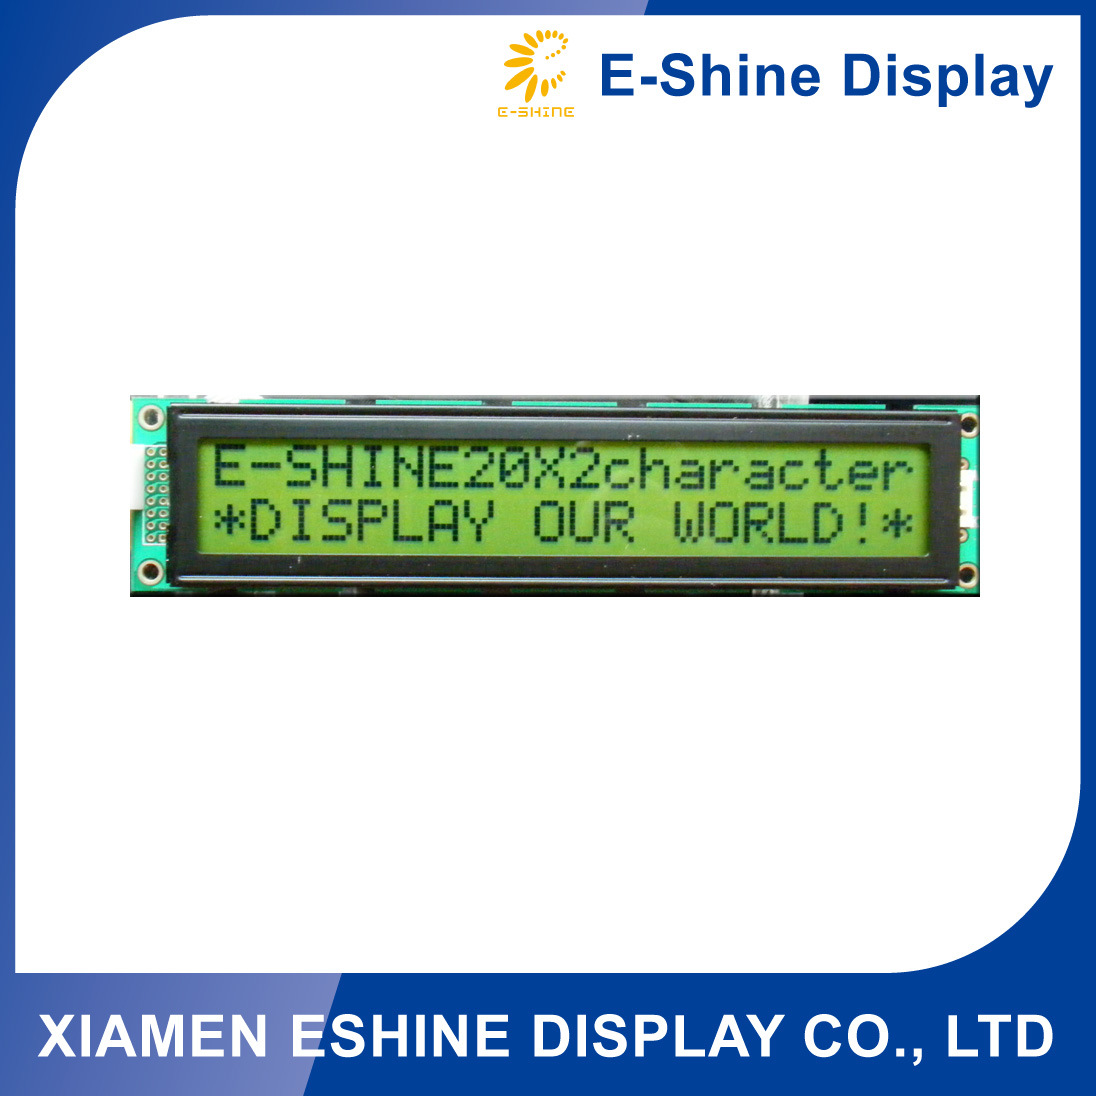 2002 STN Character Positive LCD Module Monitor Display